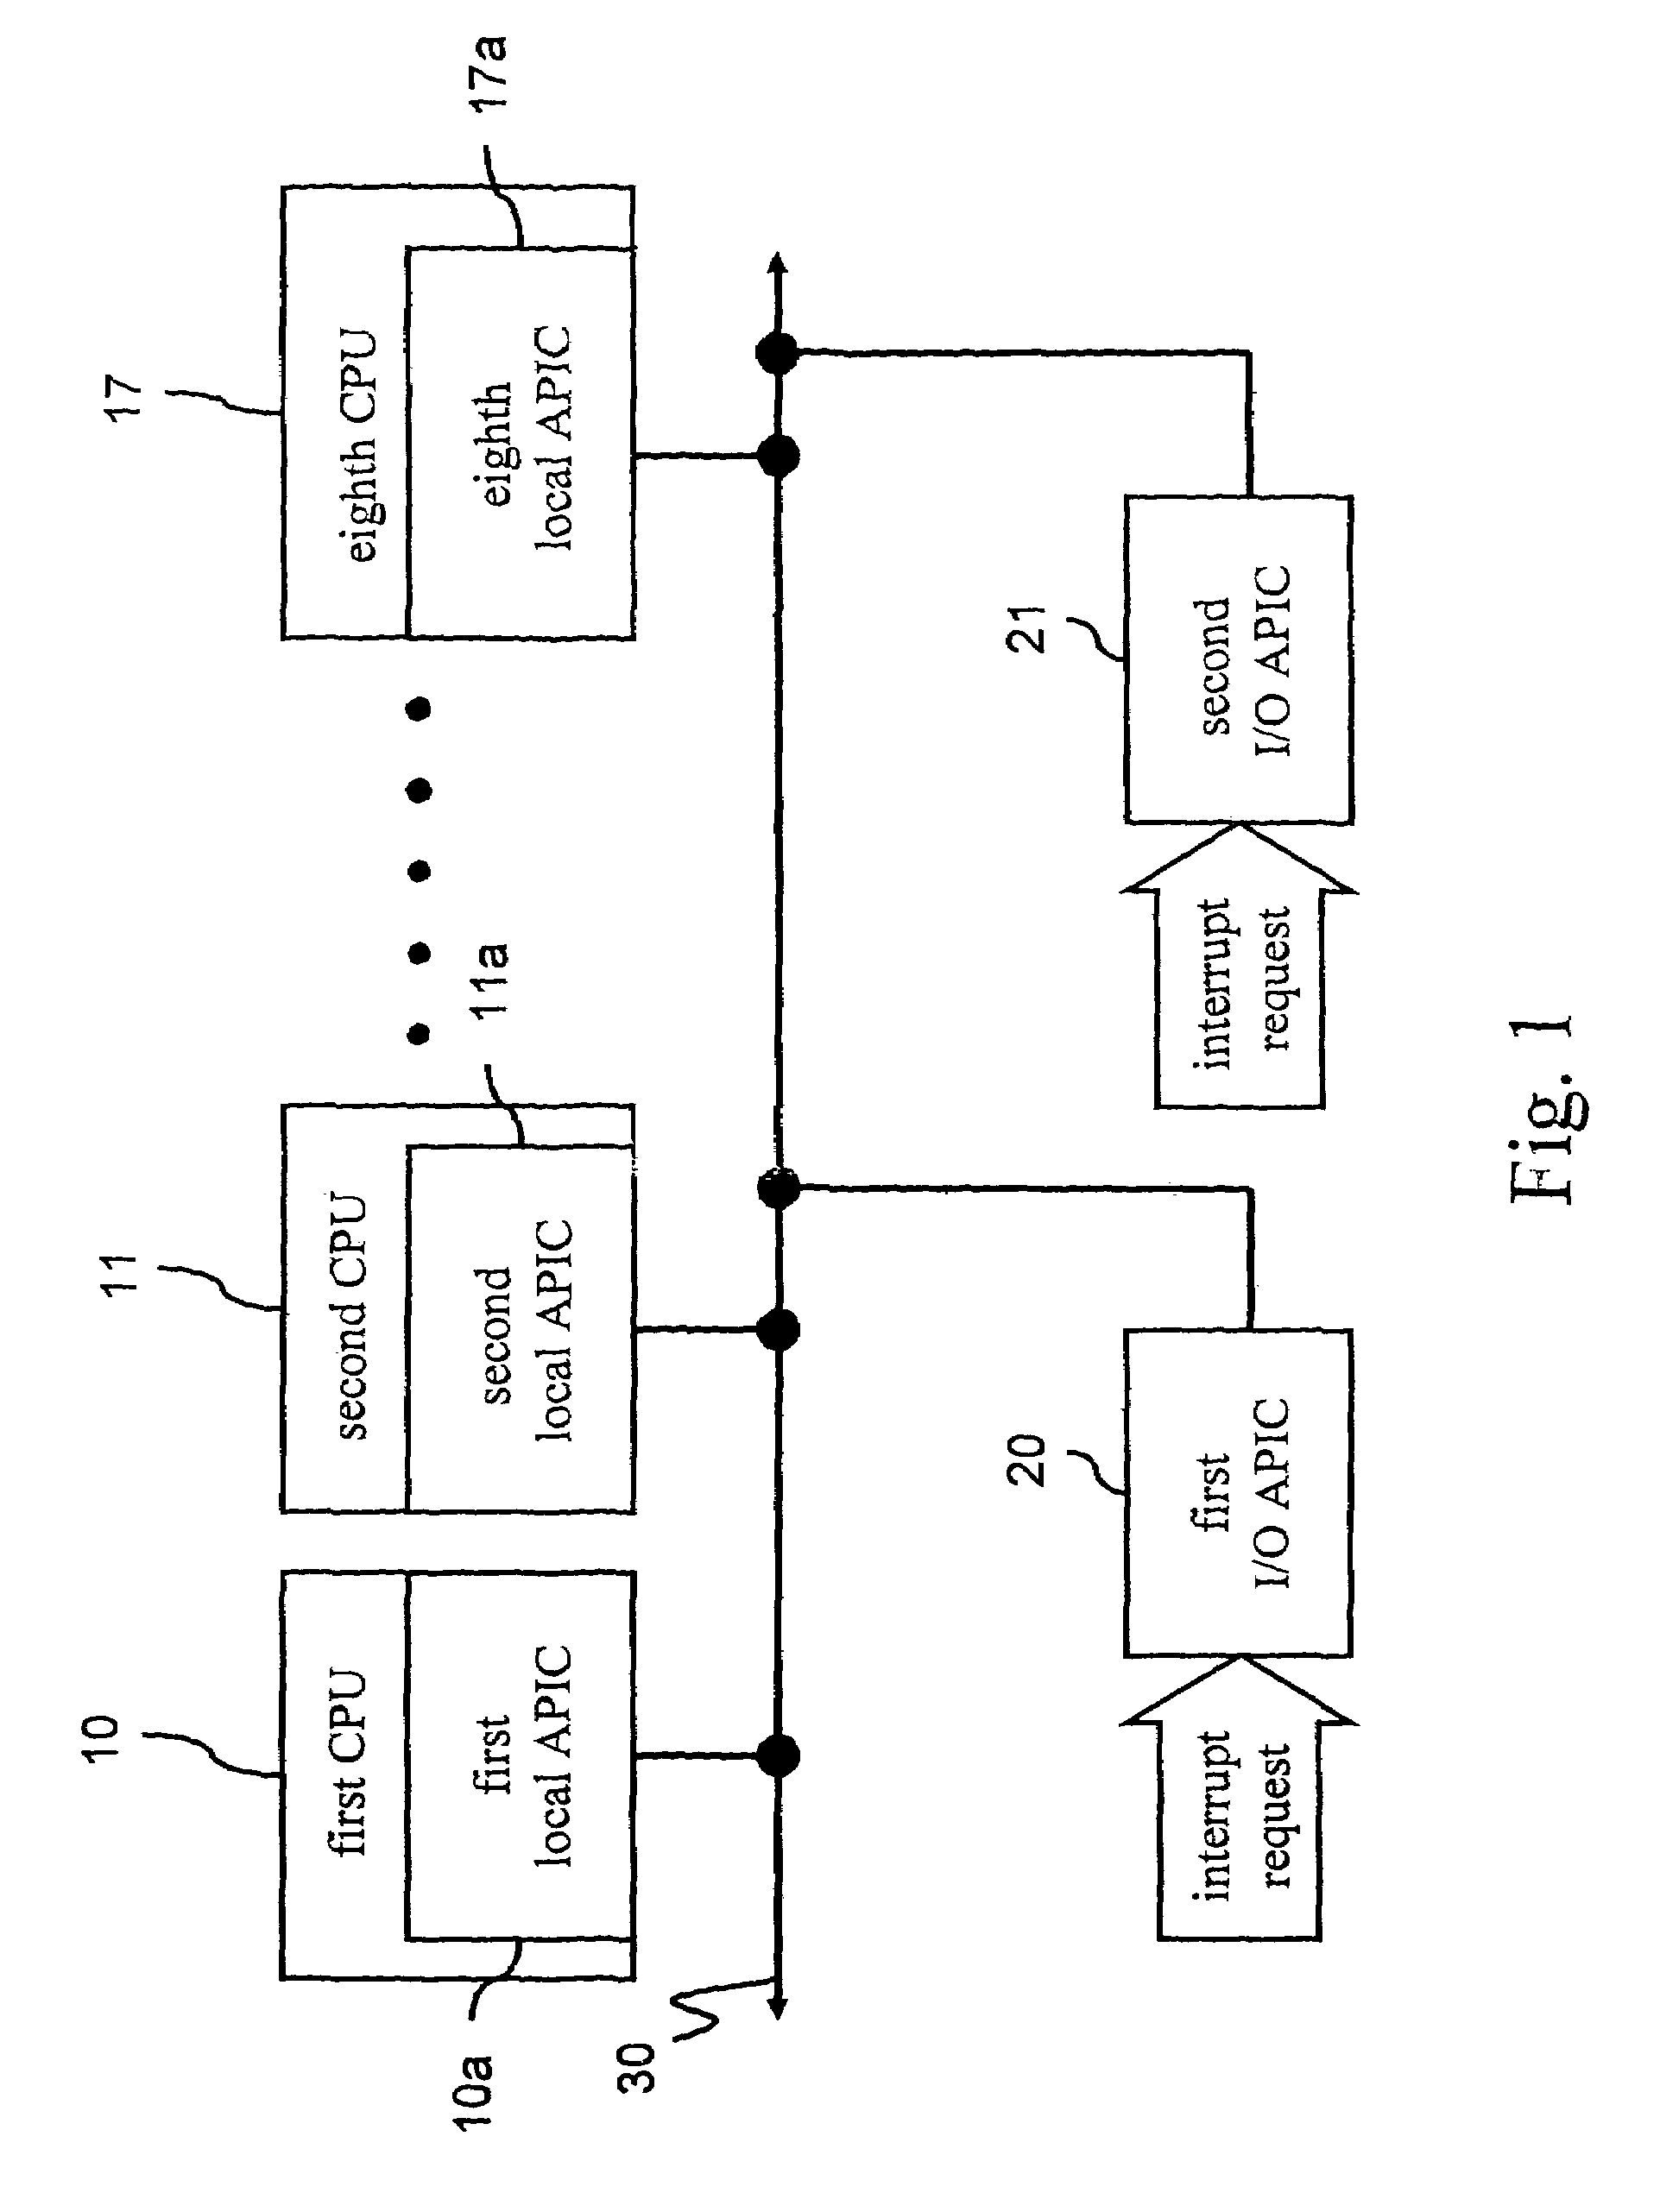 ID configuration method for advanced programmable interrupt controller